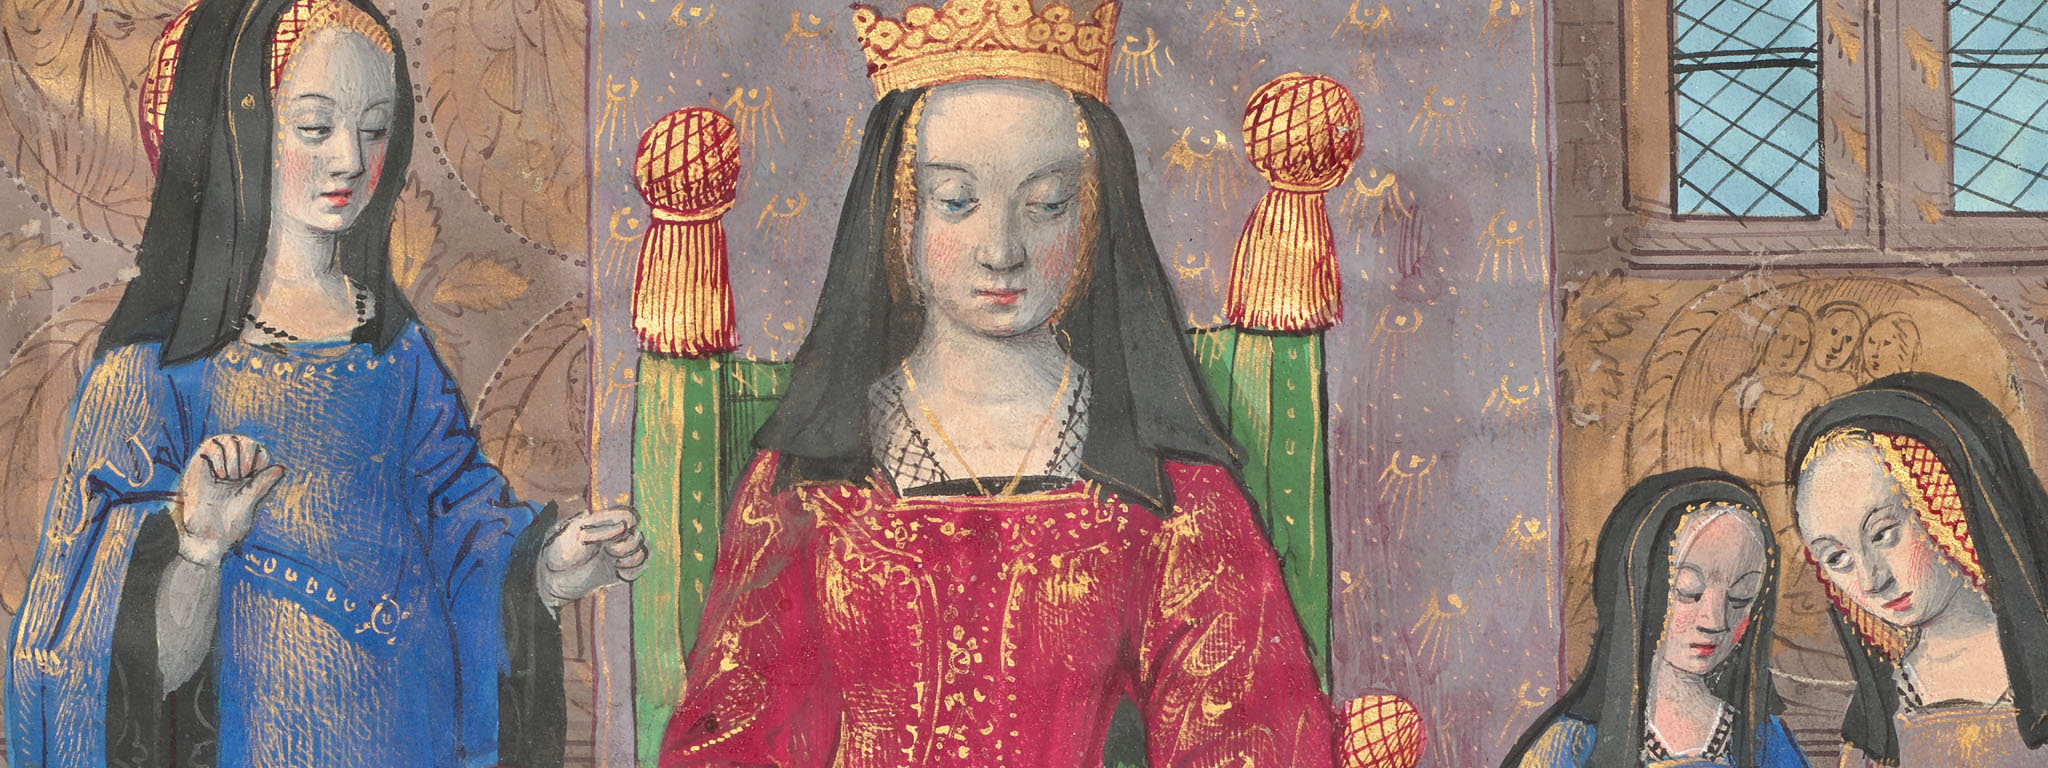 TKAnne of Brittany Enthroned, from Ovid, Excerpts from the Heroides, with Octavien de Saint-Gelais, Letters, about 1493, Master of the Chronique scandaleuse. Tempera colors, gold, and ink on parchment. Getty Museum, Ms. 121 (2021.7), fol. 55